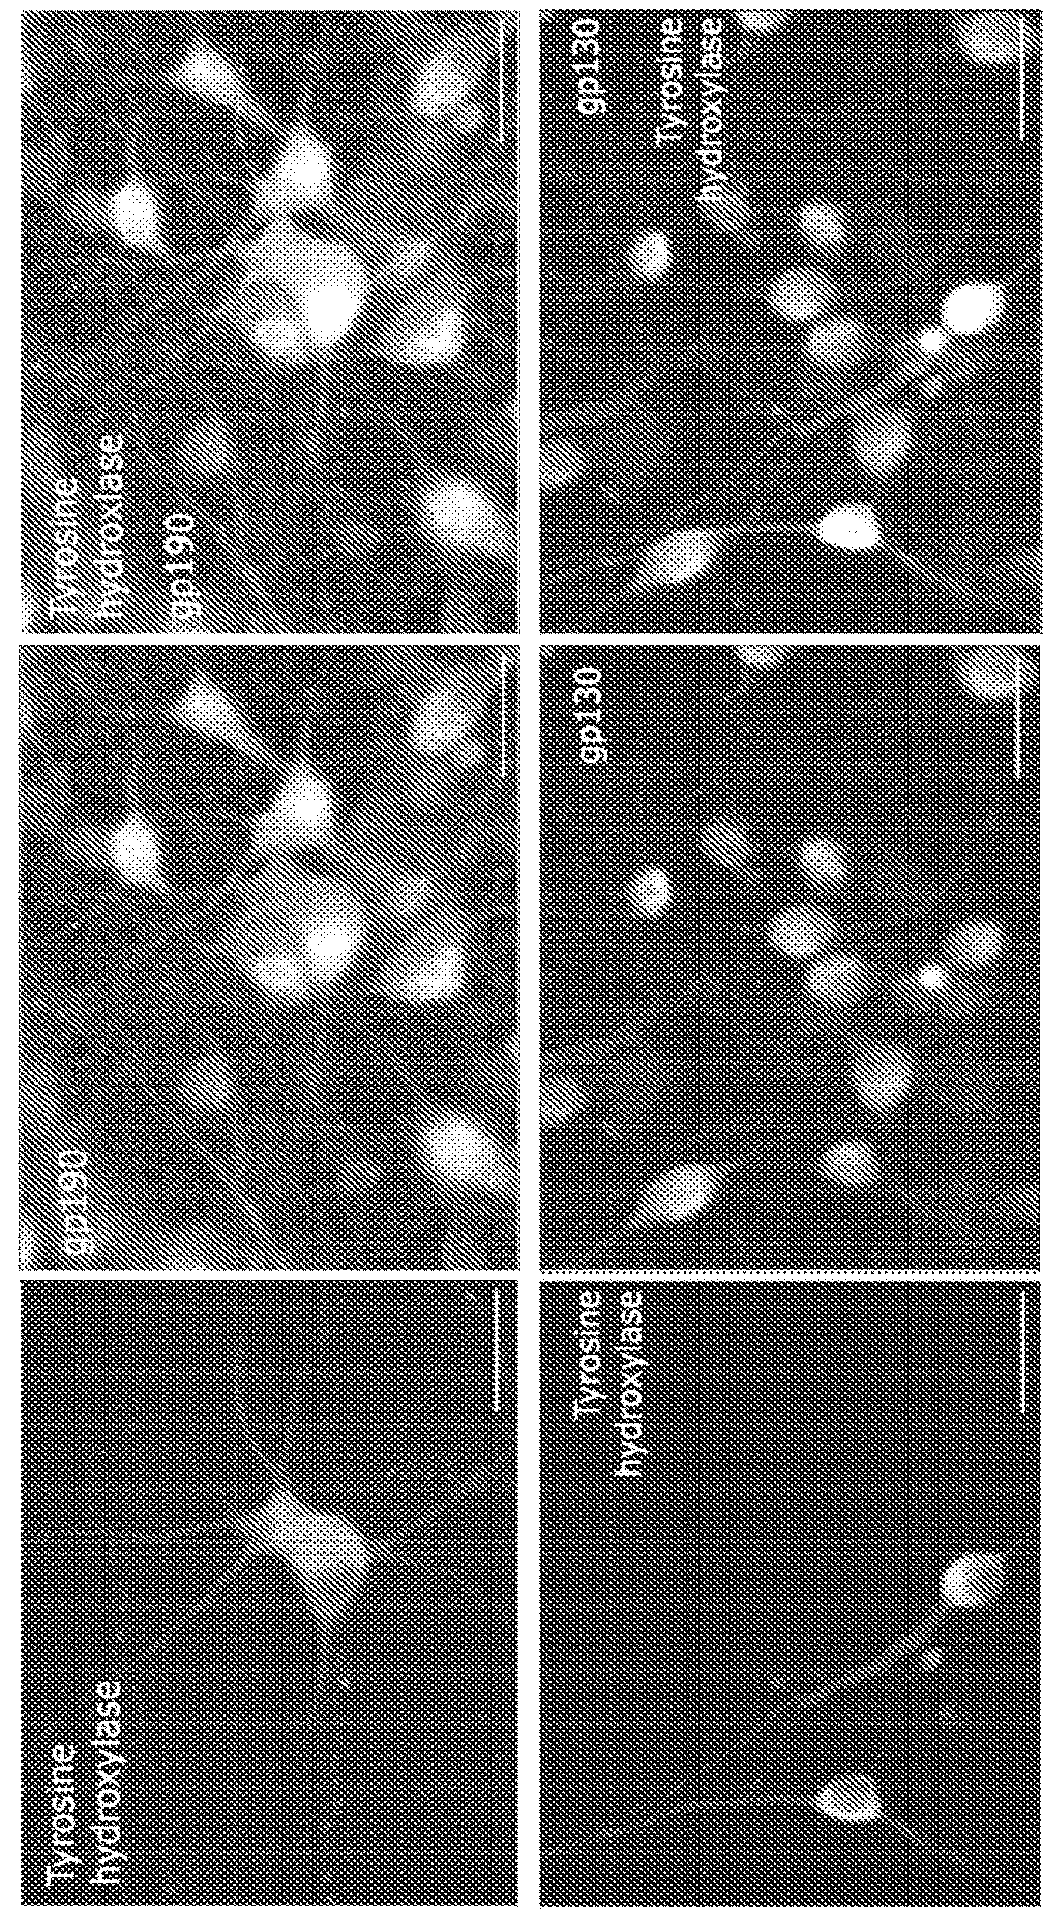 Neurotherapeutic Nanoparticle Compositions Comprising Leukemia Inhibitory Factor